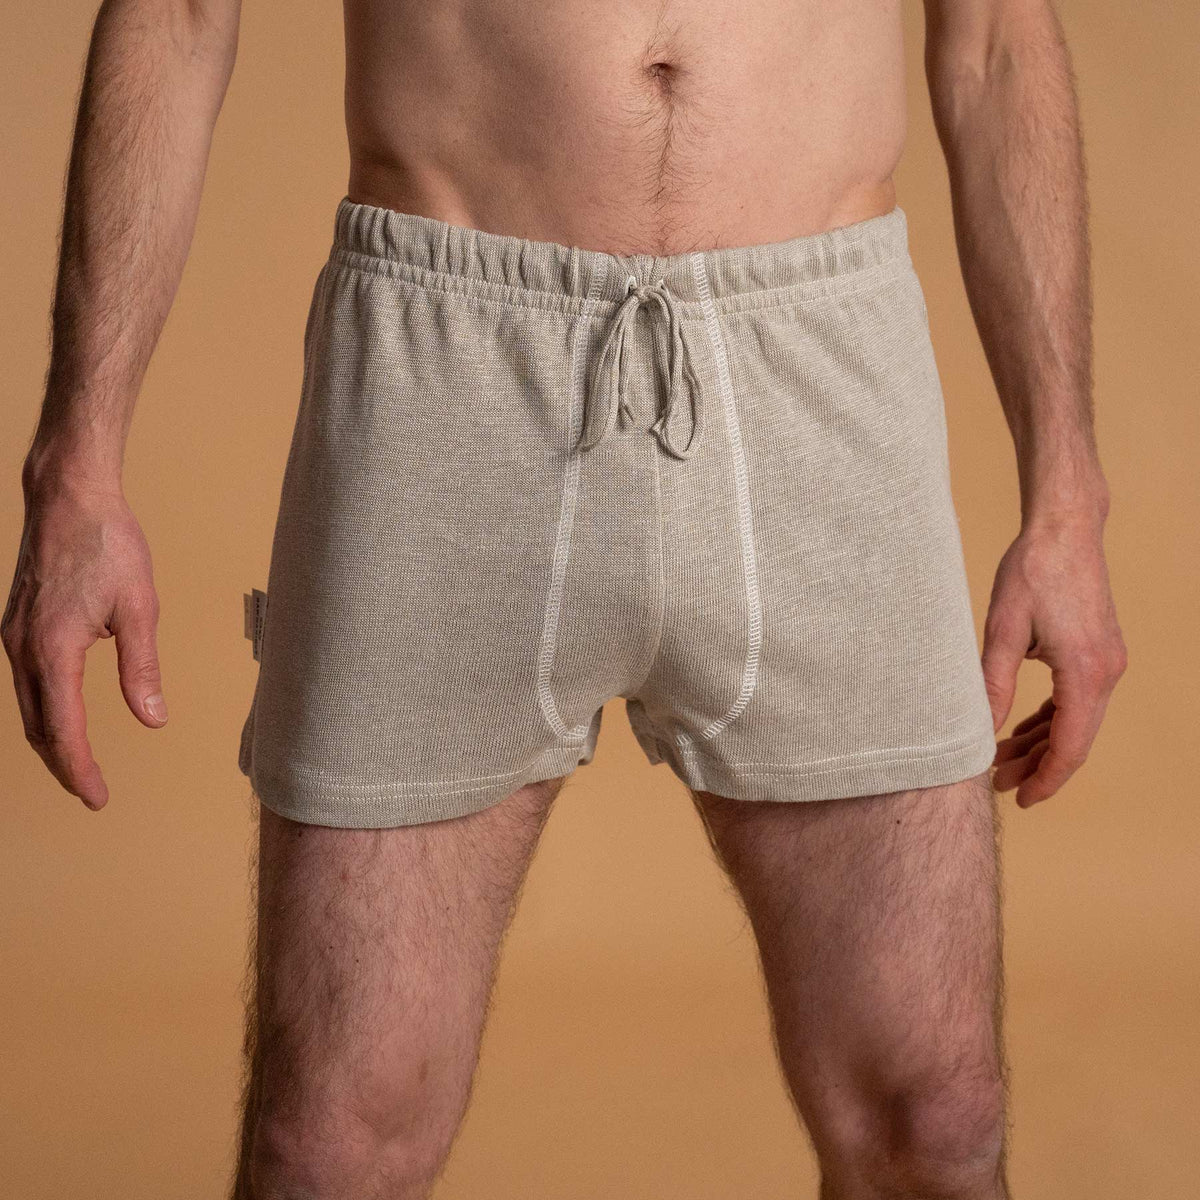 Simple & Sunday Textured Knit Boxer Shorts